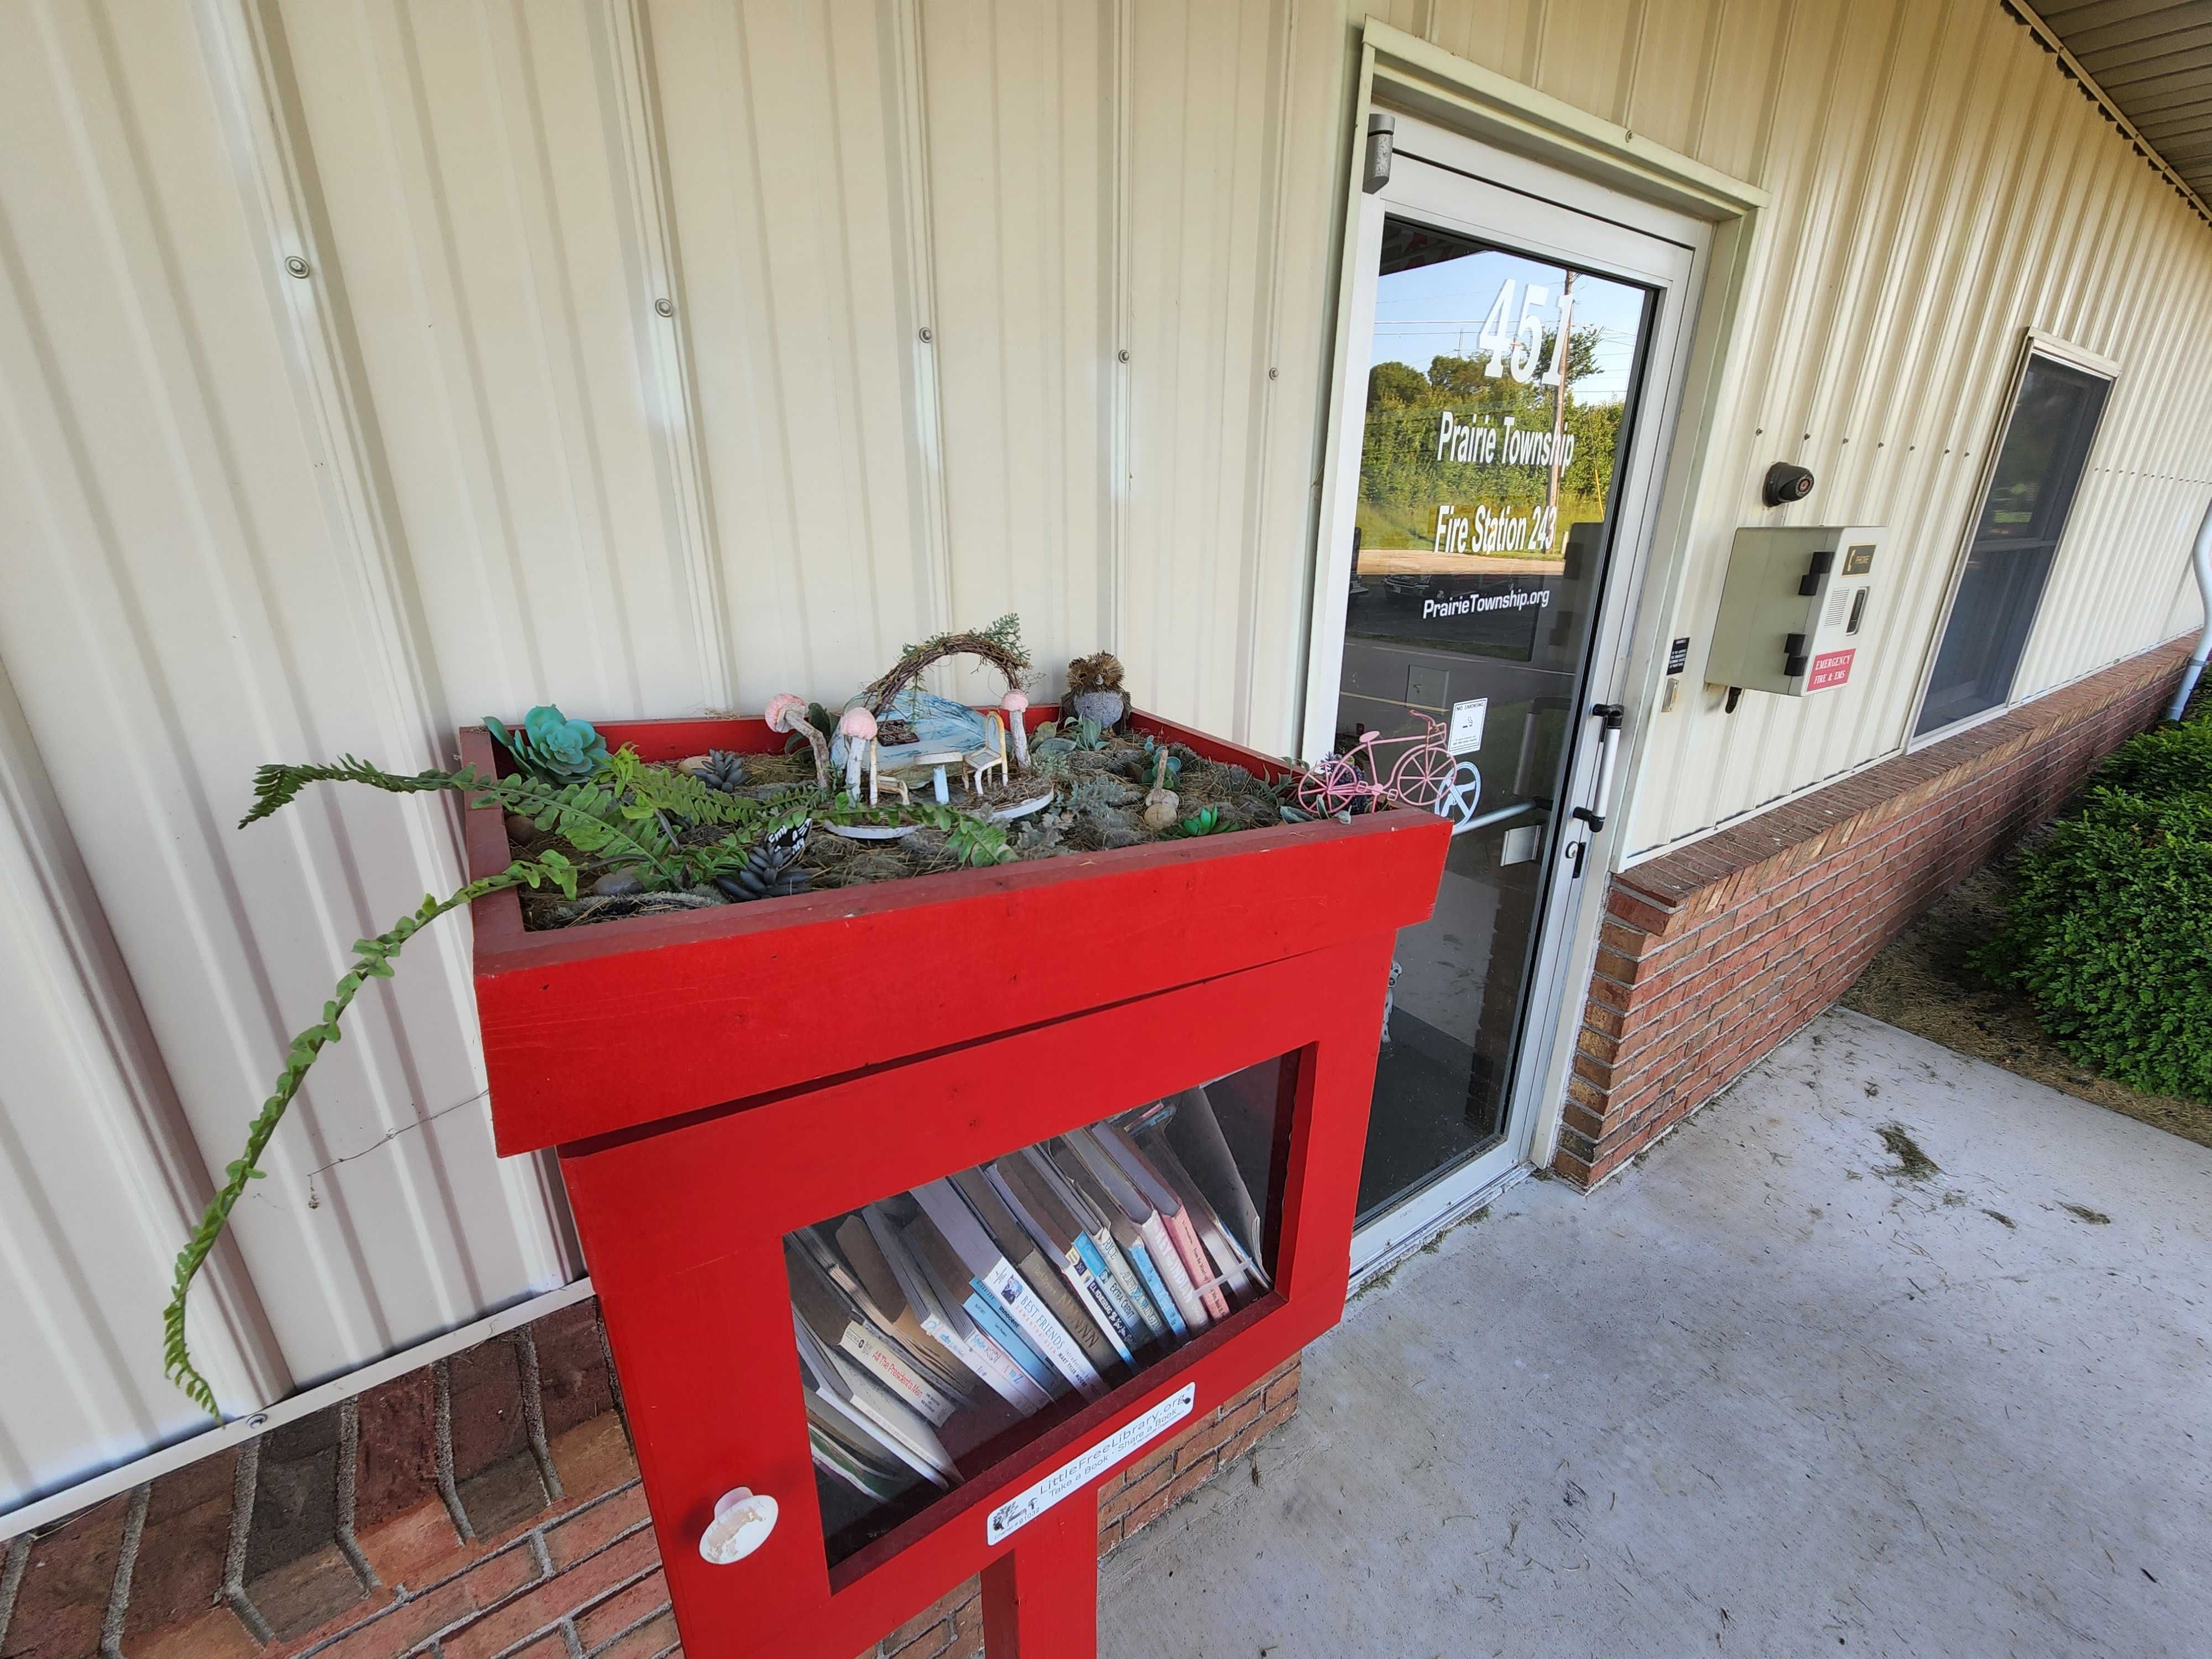 A Little Free Library with a fairy garden on top.